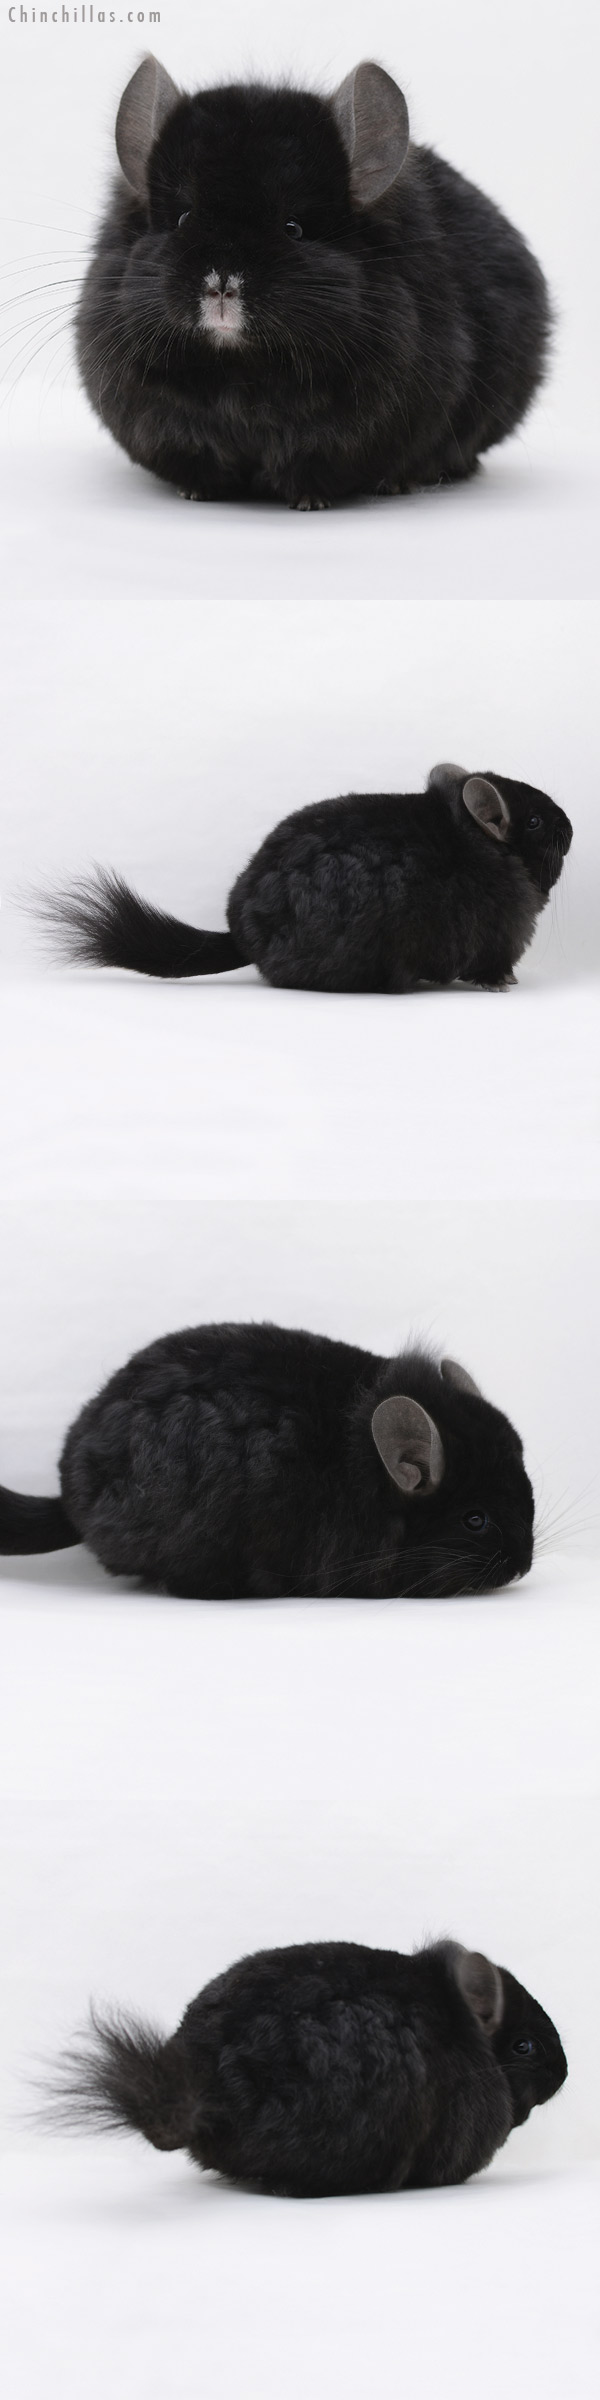 Chinchilla or related item offered for sale or export on Chinchillas.com - 20237 Exceptional Ebony ( Locken Carrier )  Royal Persian Angora Female Chinchilla